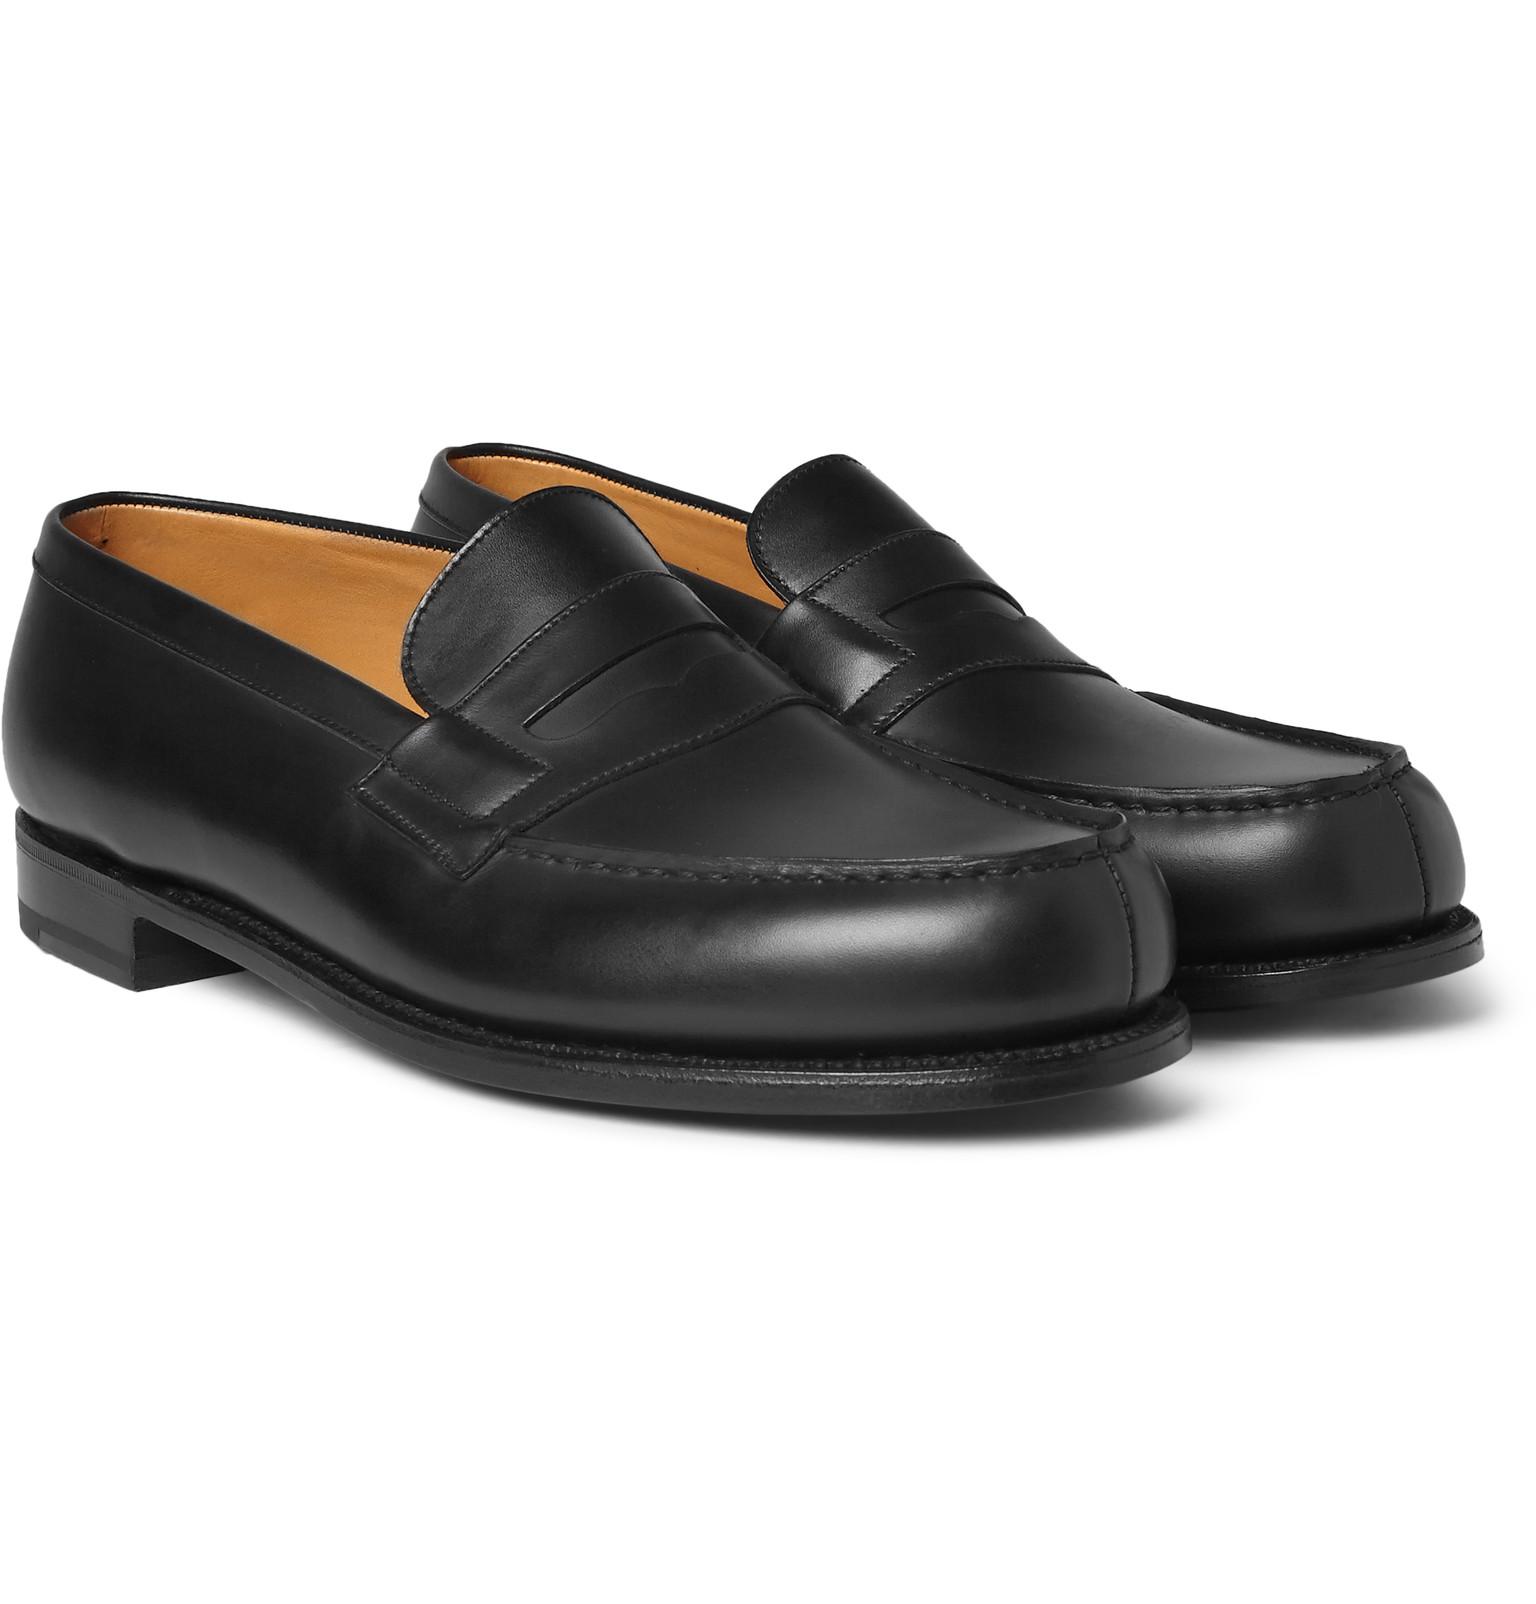 J.M. Weston Leather 180 Loafers in Black for Men - Lyst